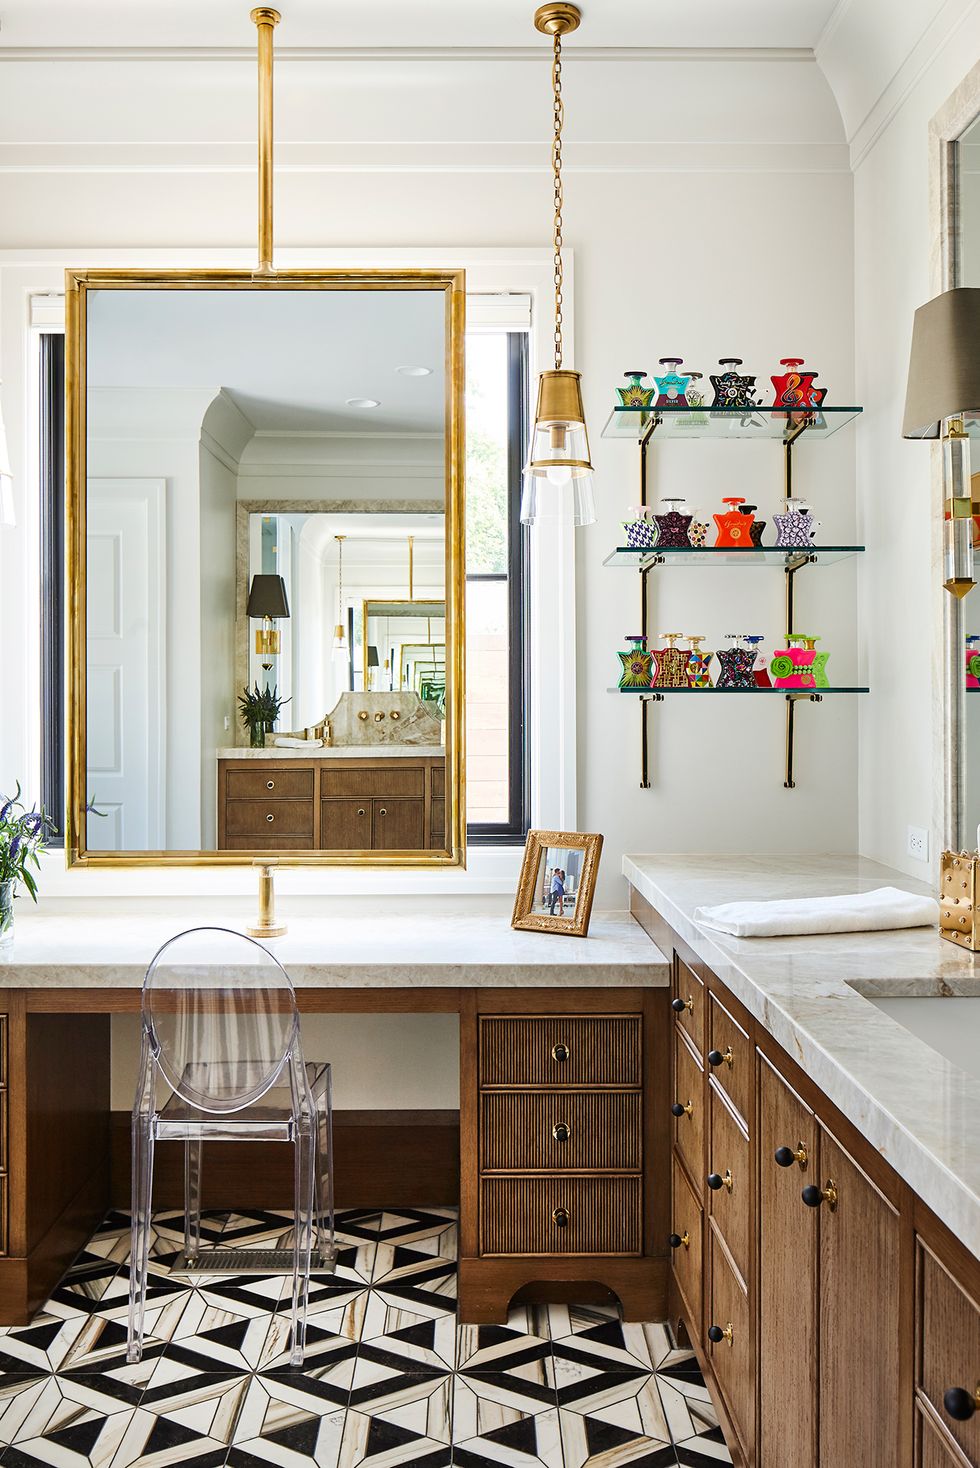 The Latest Trends in Fixture Finishes for the Bathroom